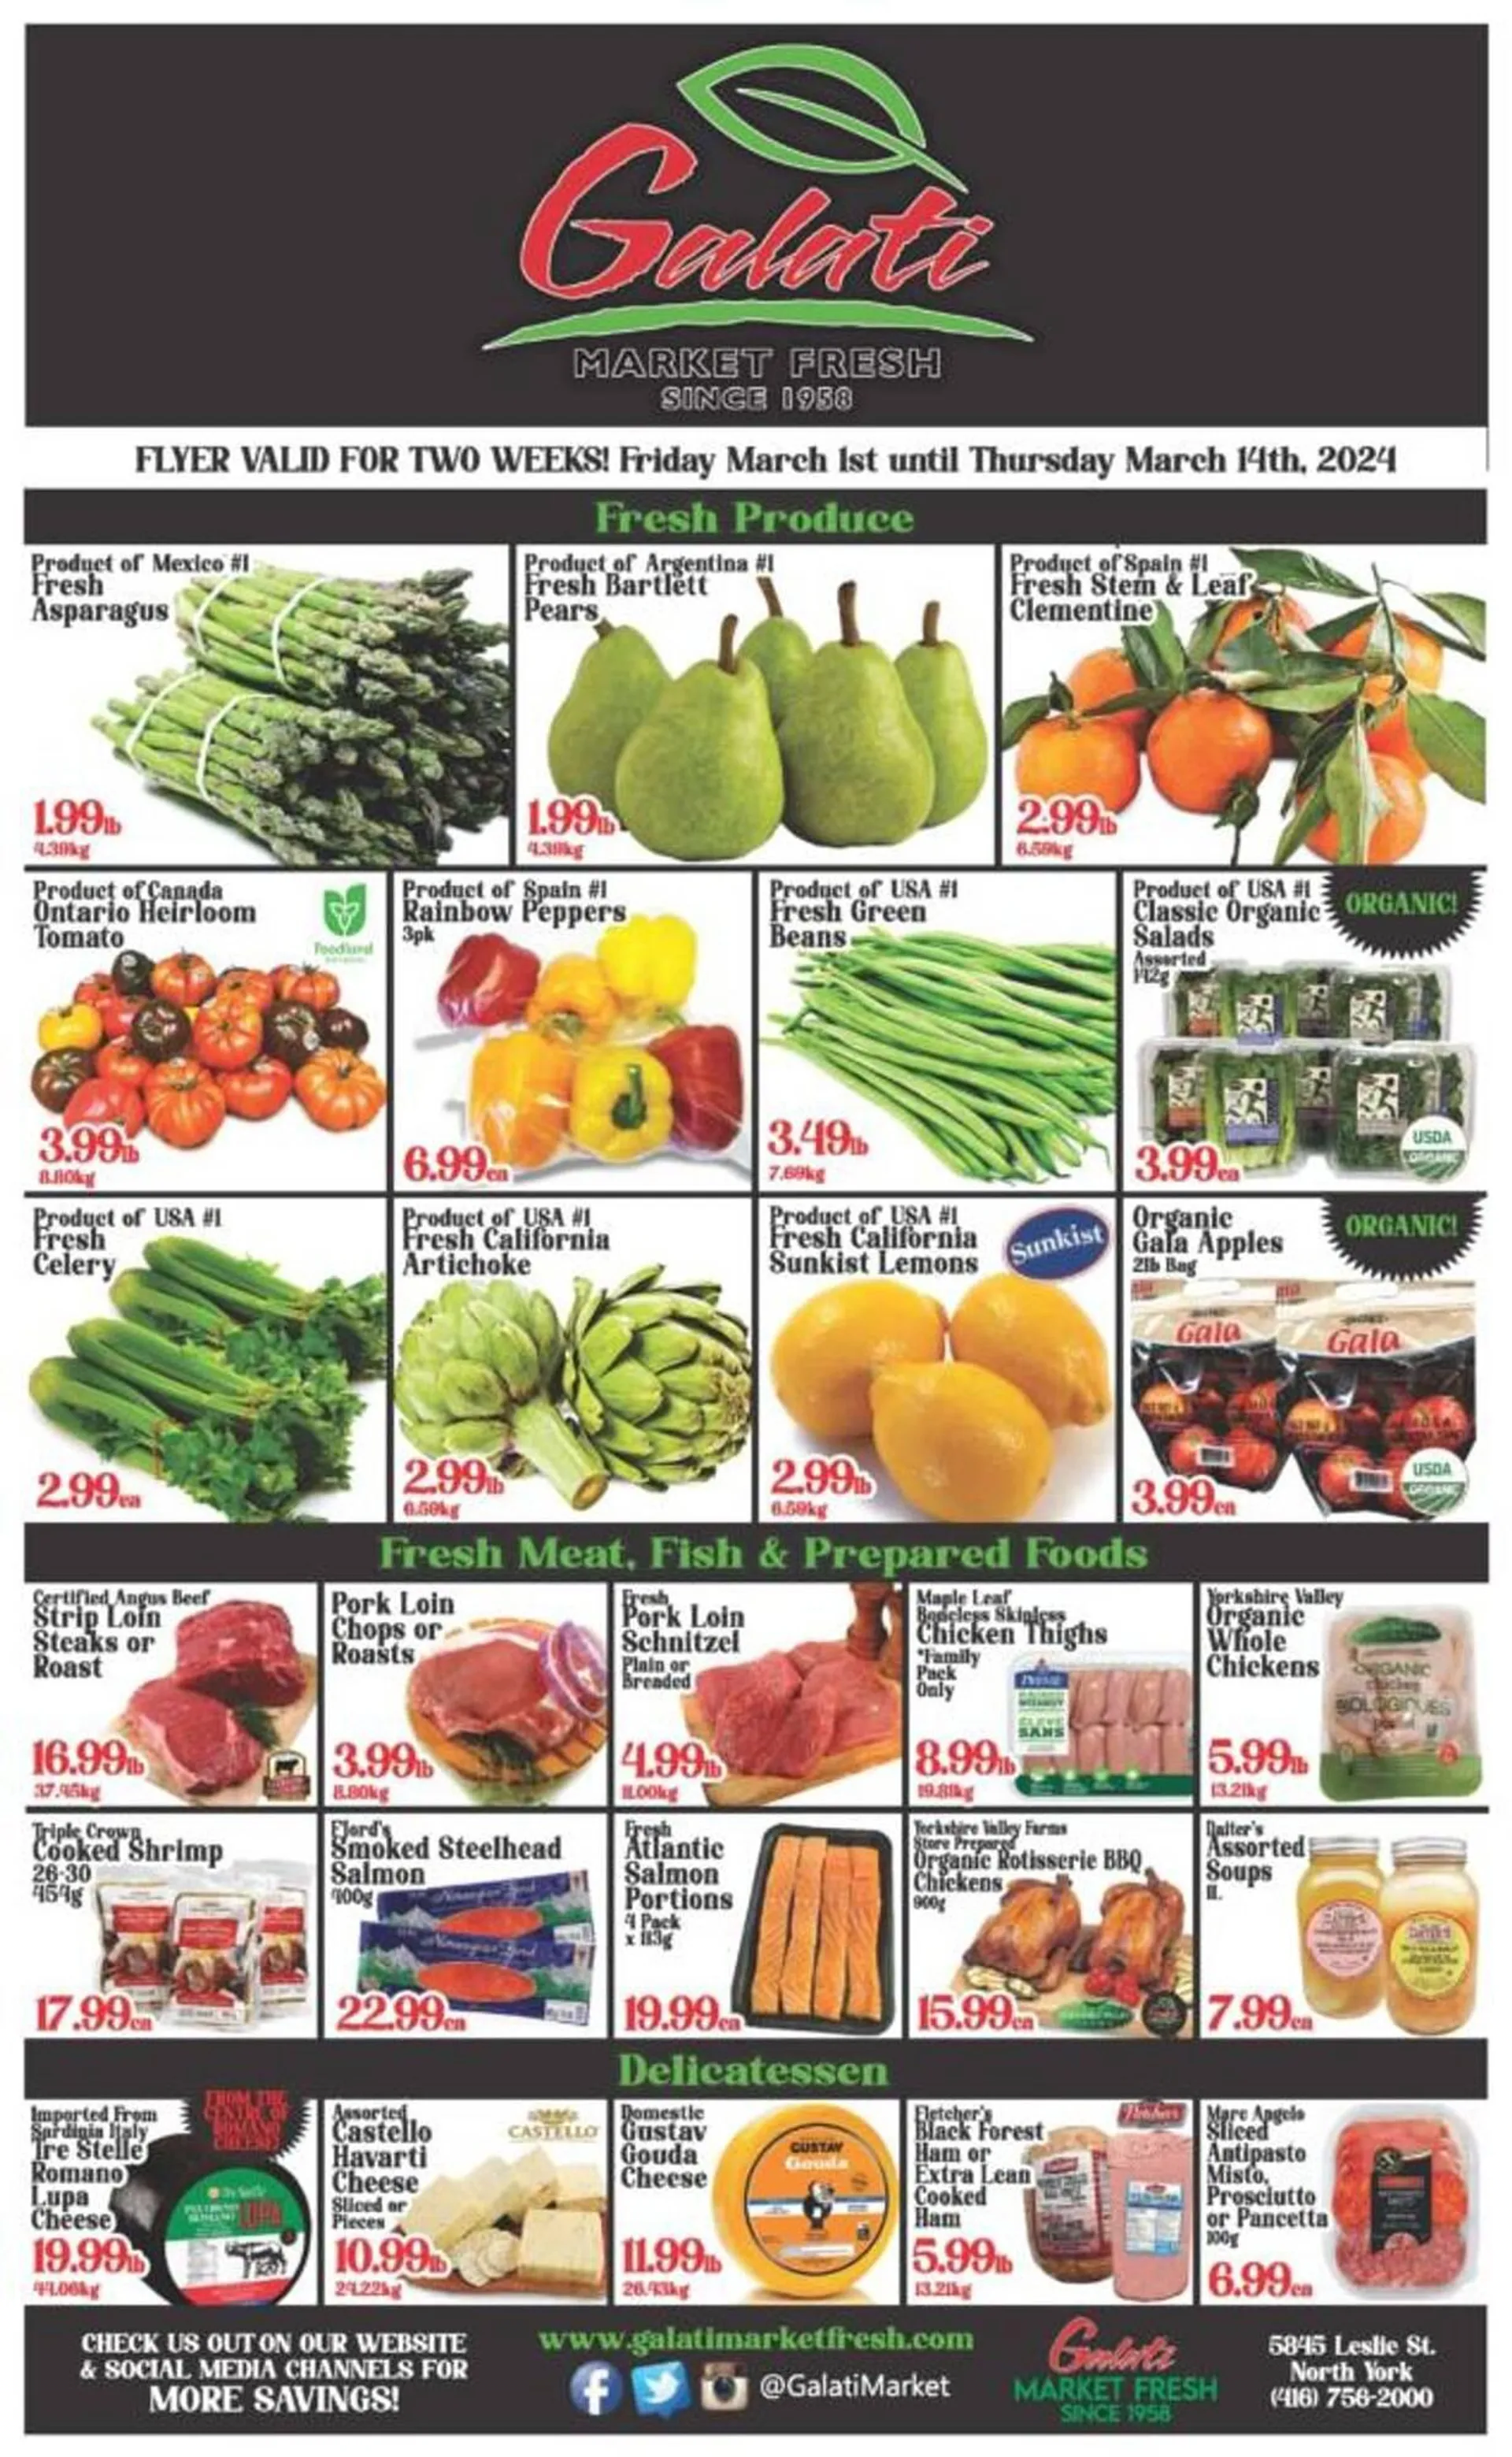 Galati Market Fresh flyer from March 12 to March 14 2024 - flyer page 1